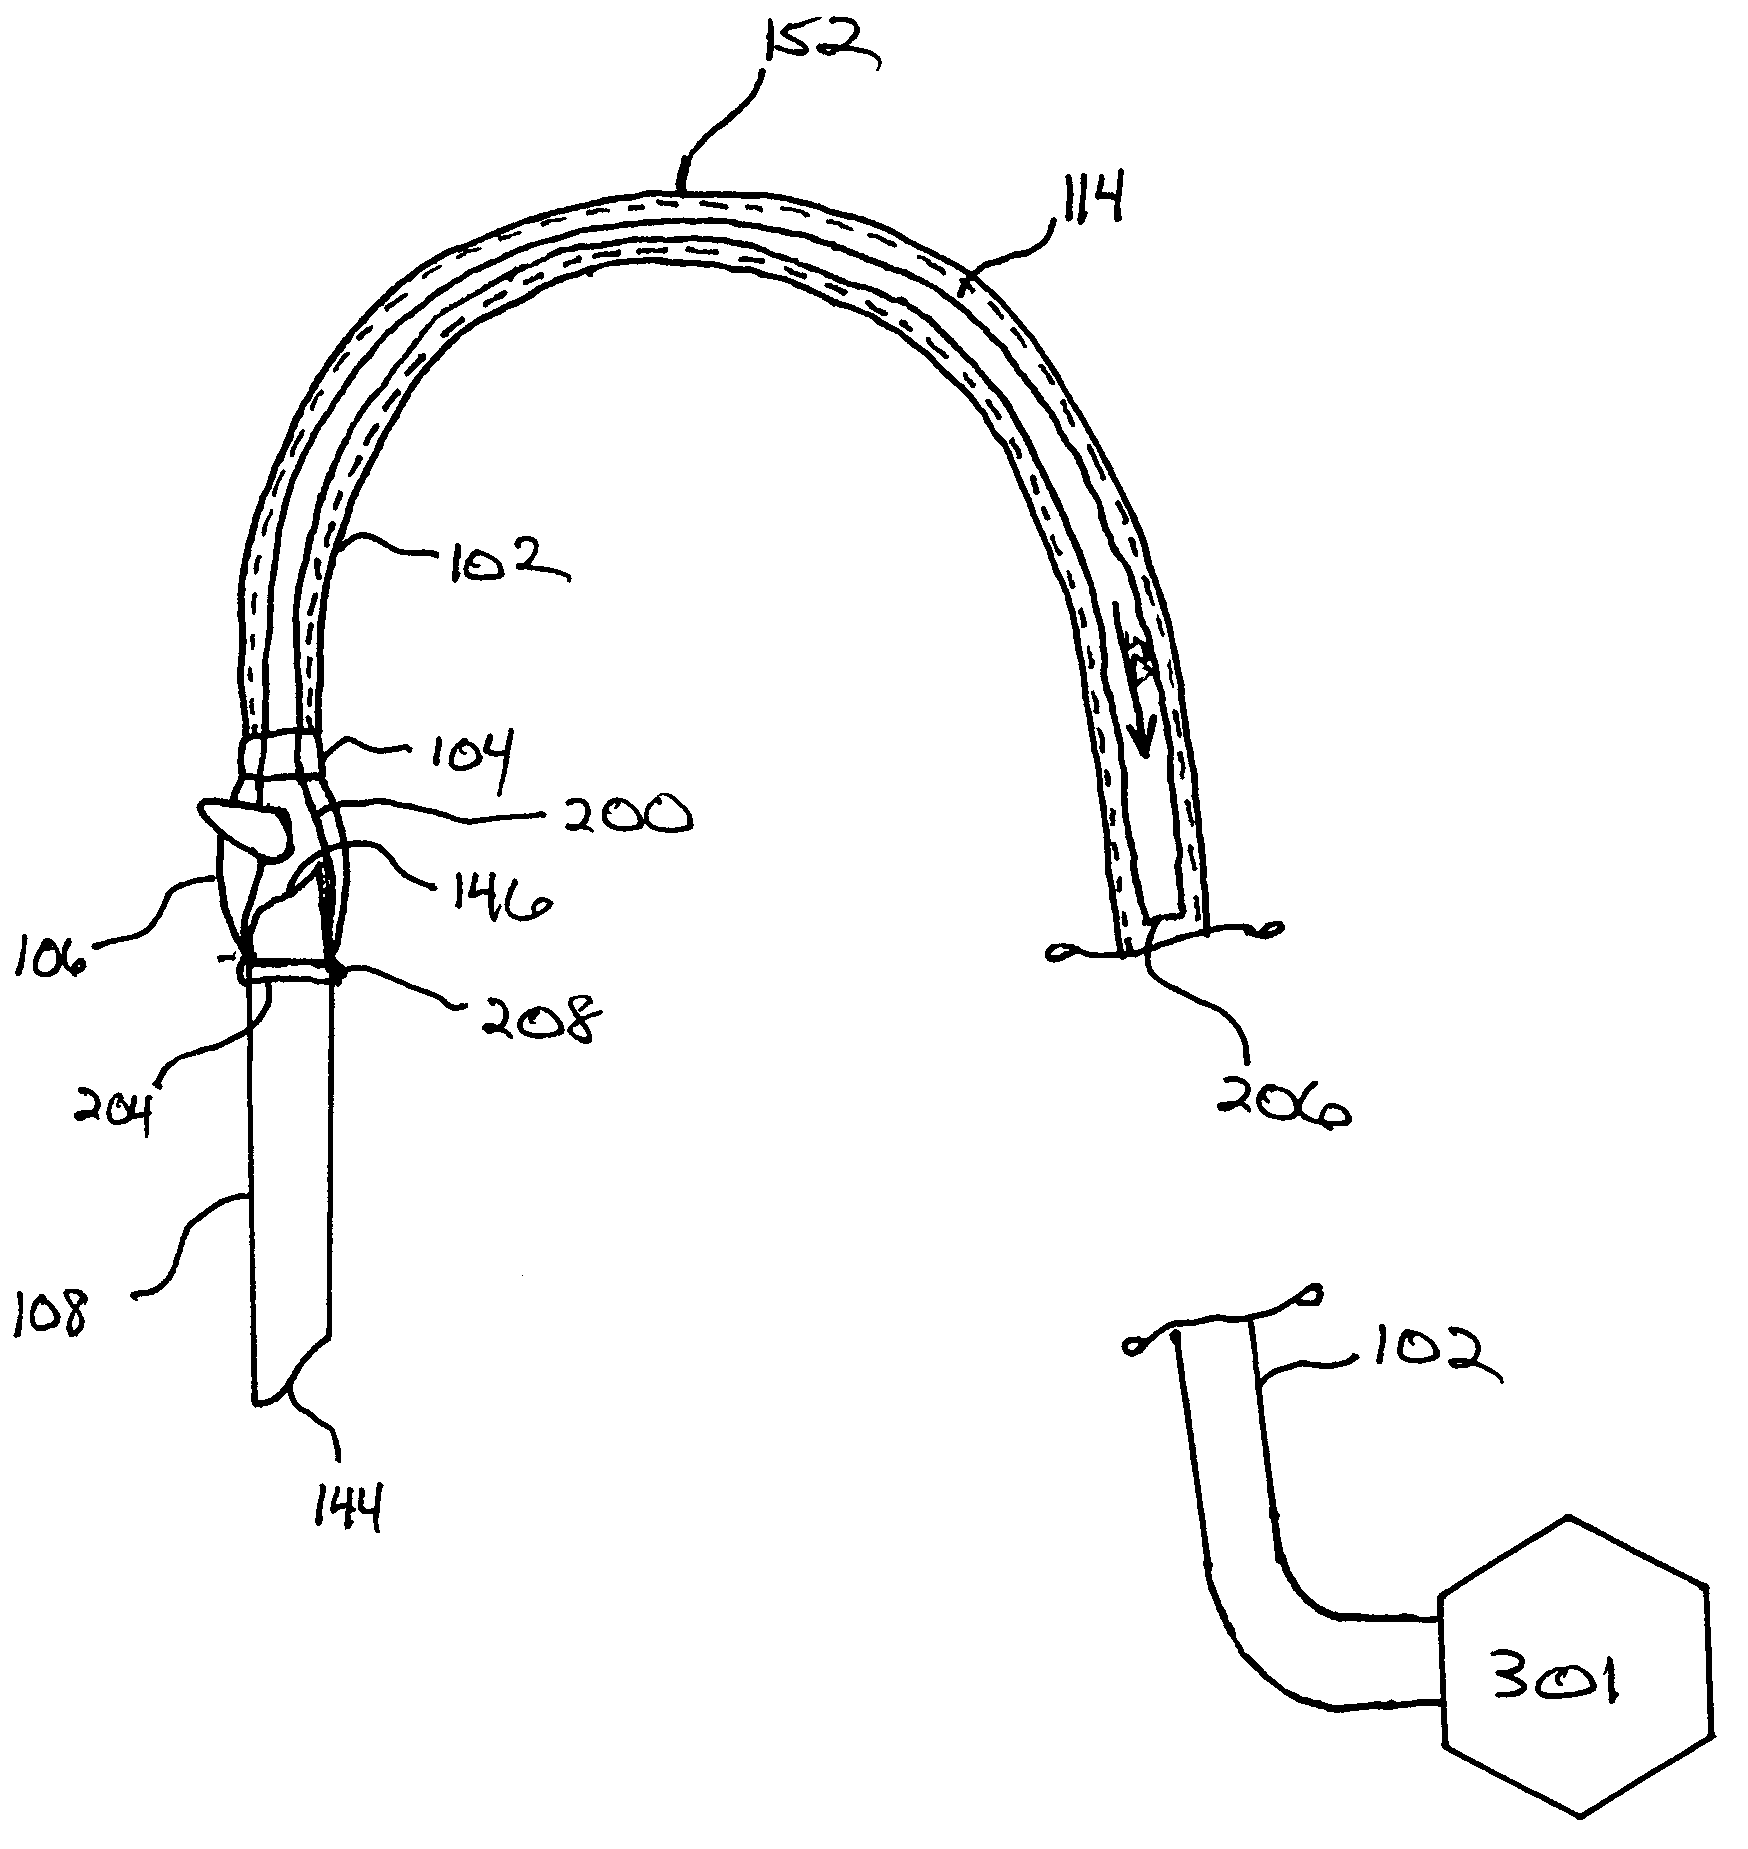 Backflow prevention sleeve for suctioning devices